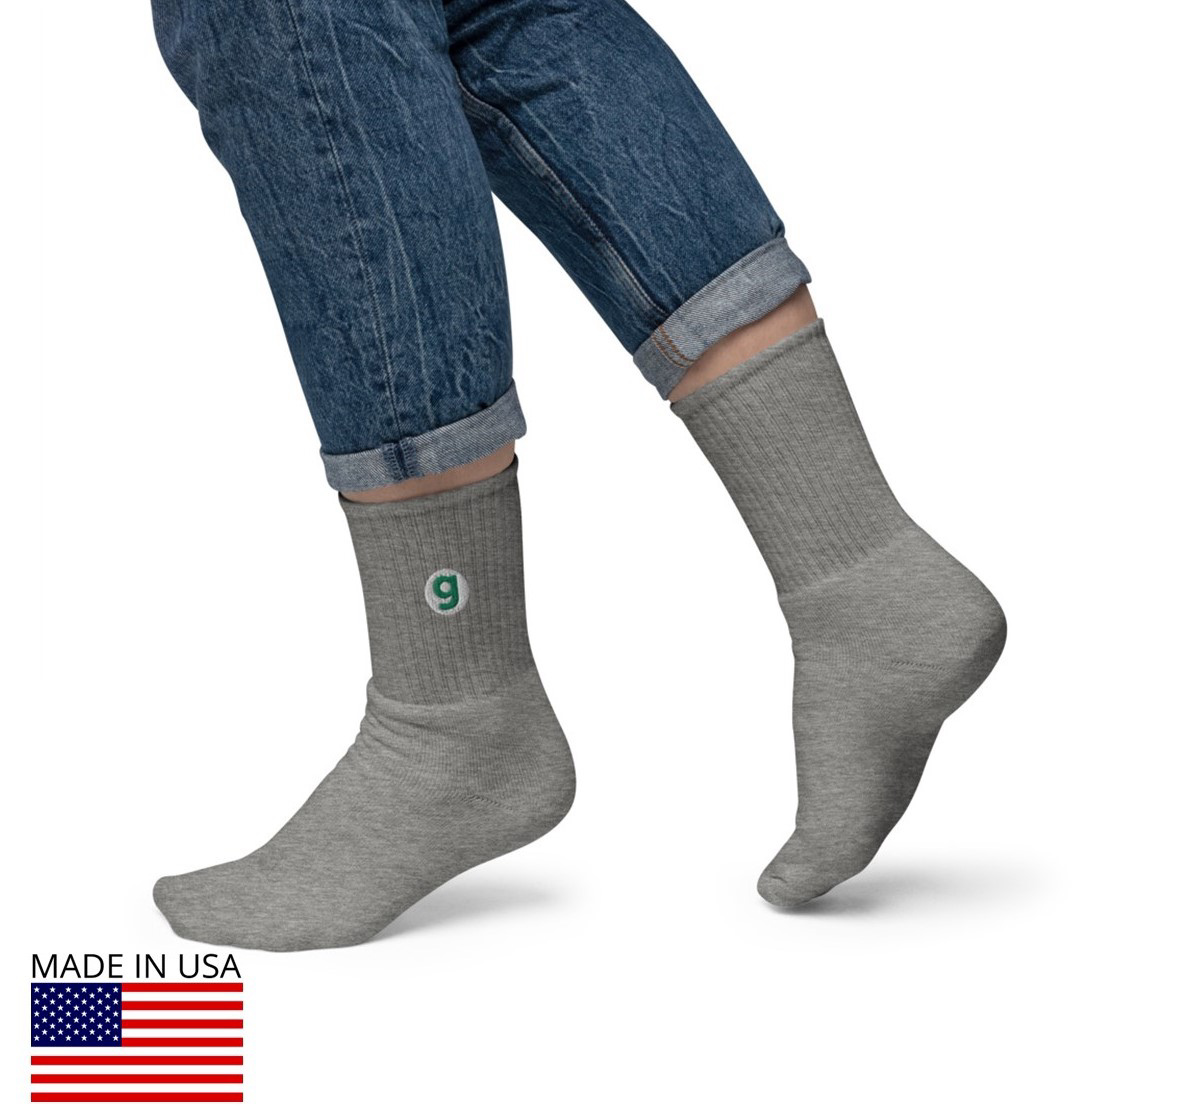 Green G Embroidered Socks - Heather Grey / S/M